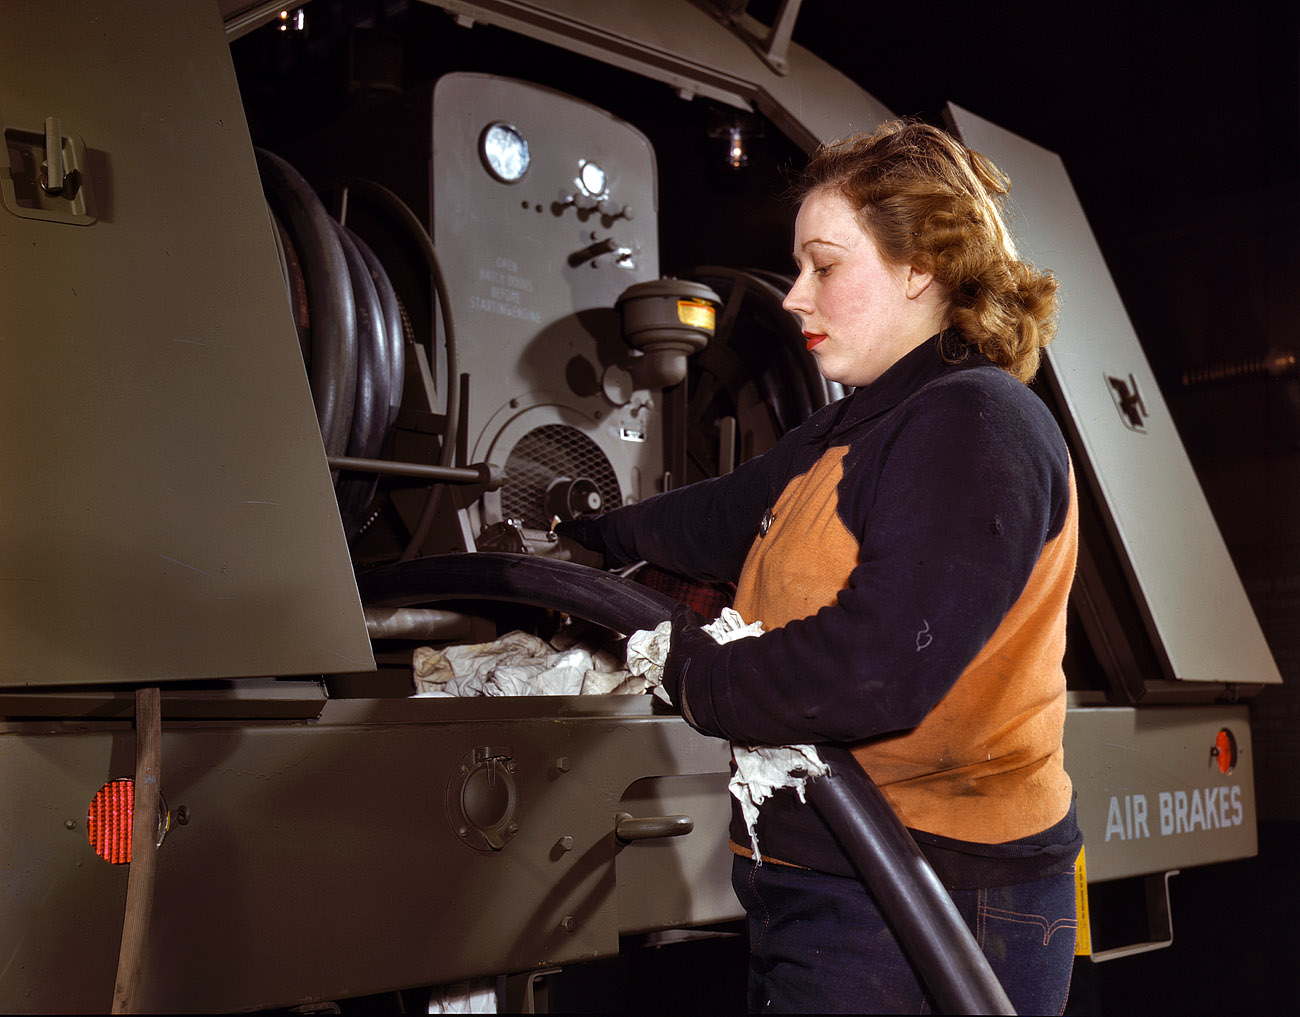 February 1943. Heil & Co., Milwaukee. "Agnes Cliemka, age 23, husband may be going into the service any day. Agnes used to work in a department store. Checking fuel hose on gasoline trailer before it is turned over to the Air Force." 4x5 Kodachrome transparency by Howard Hollem. View full size.